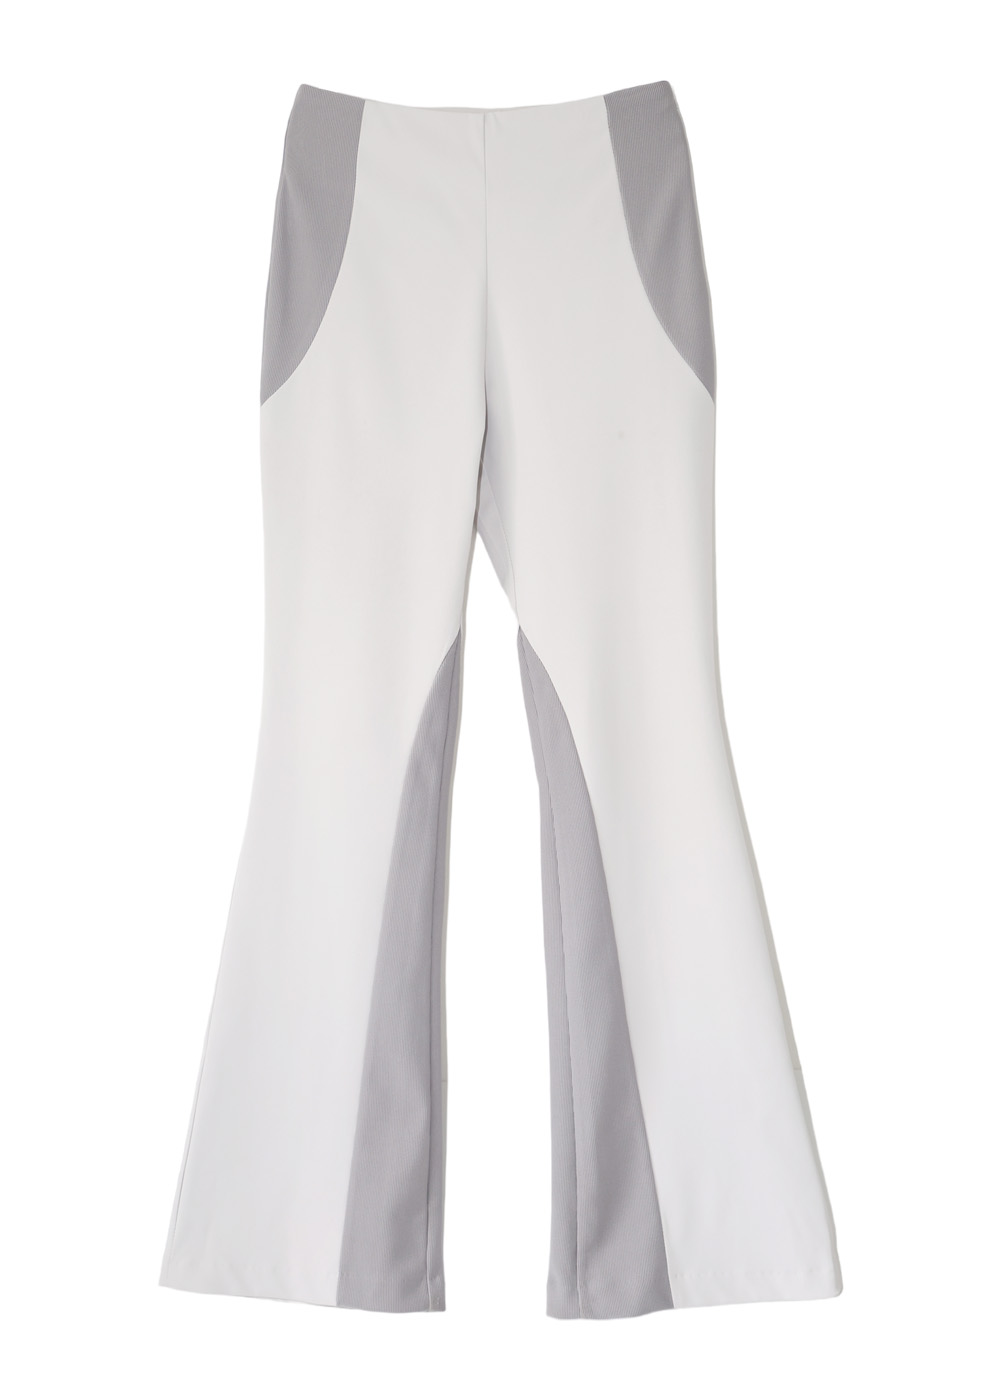 CURVED FLARE PANTS